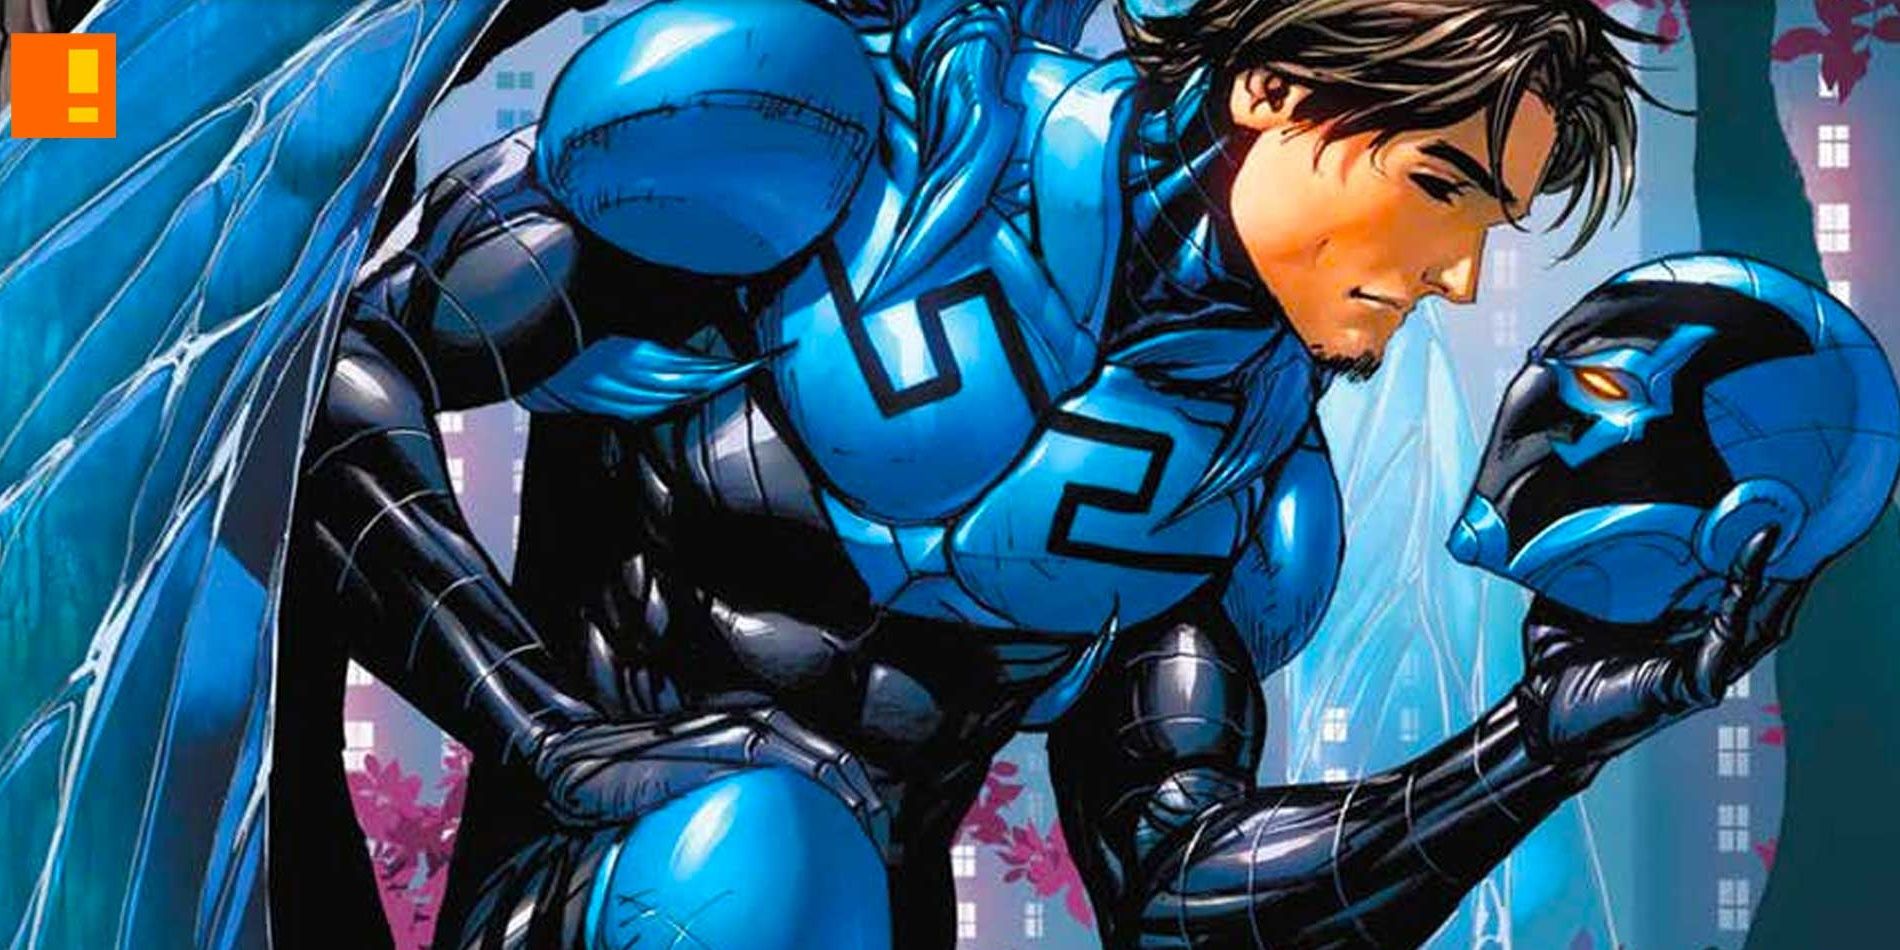 Sharon Stone Joins Blue Beetle As The DC Movie's New Villain